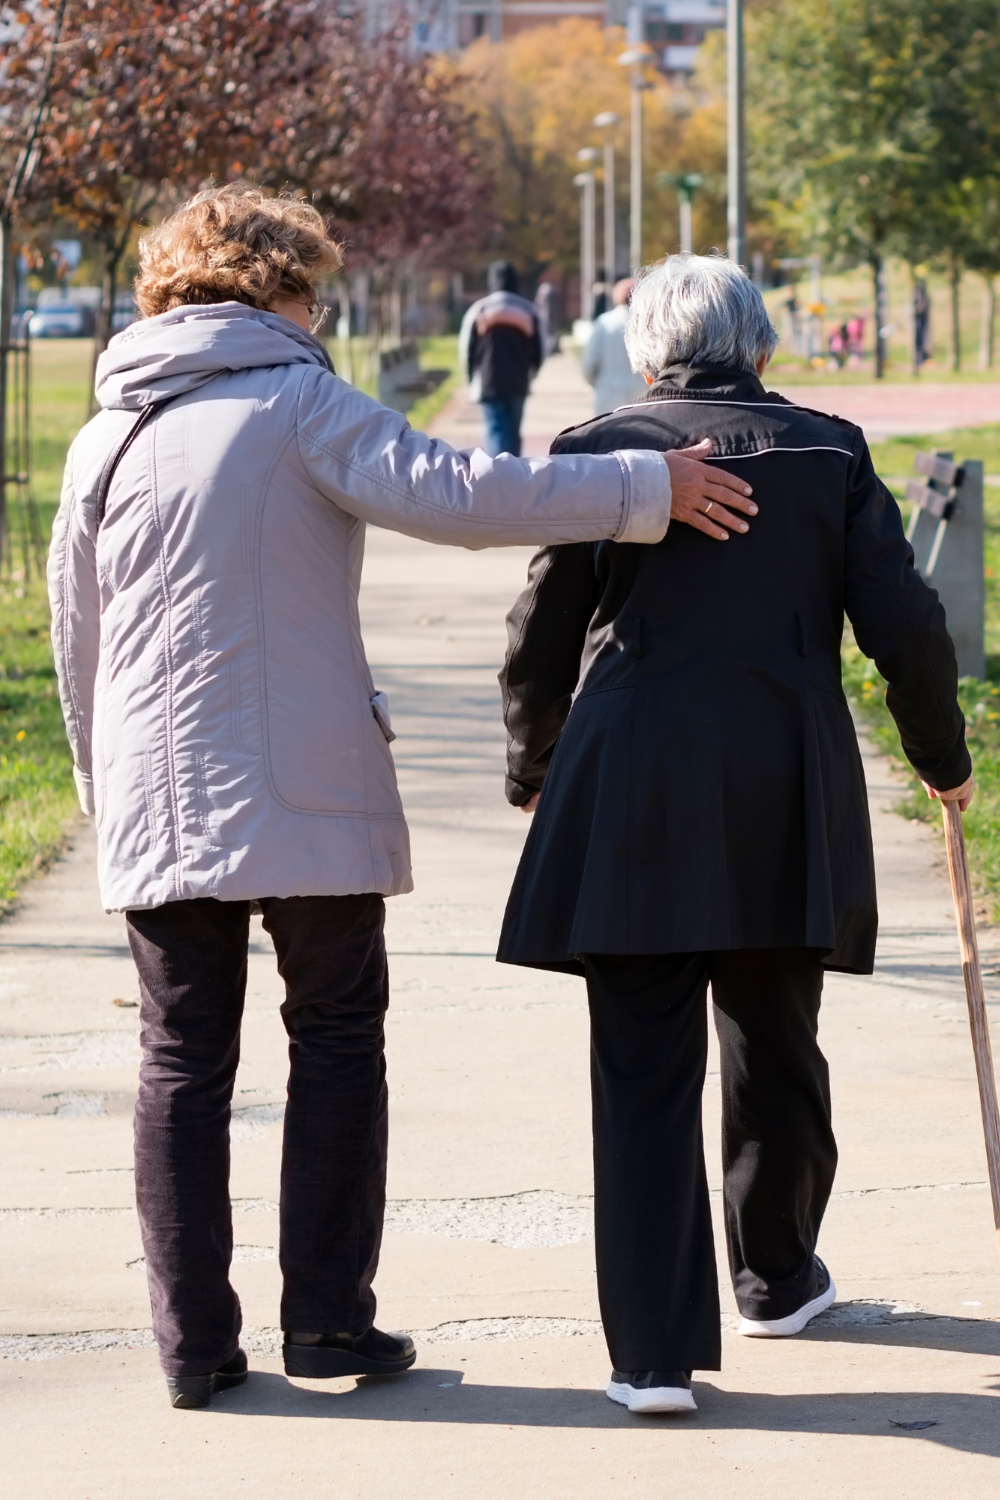 3 Practical Tips on How to Care for the Senior in Your Life